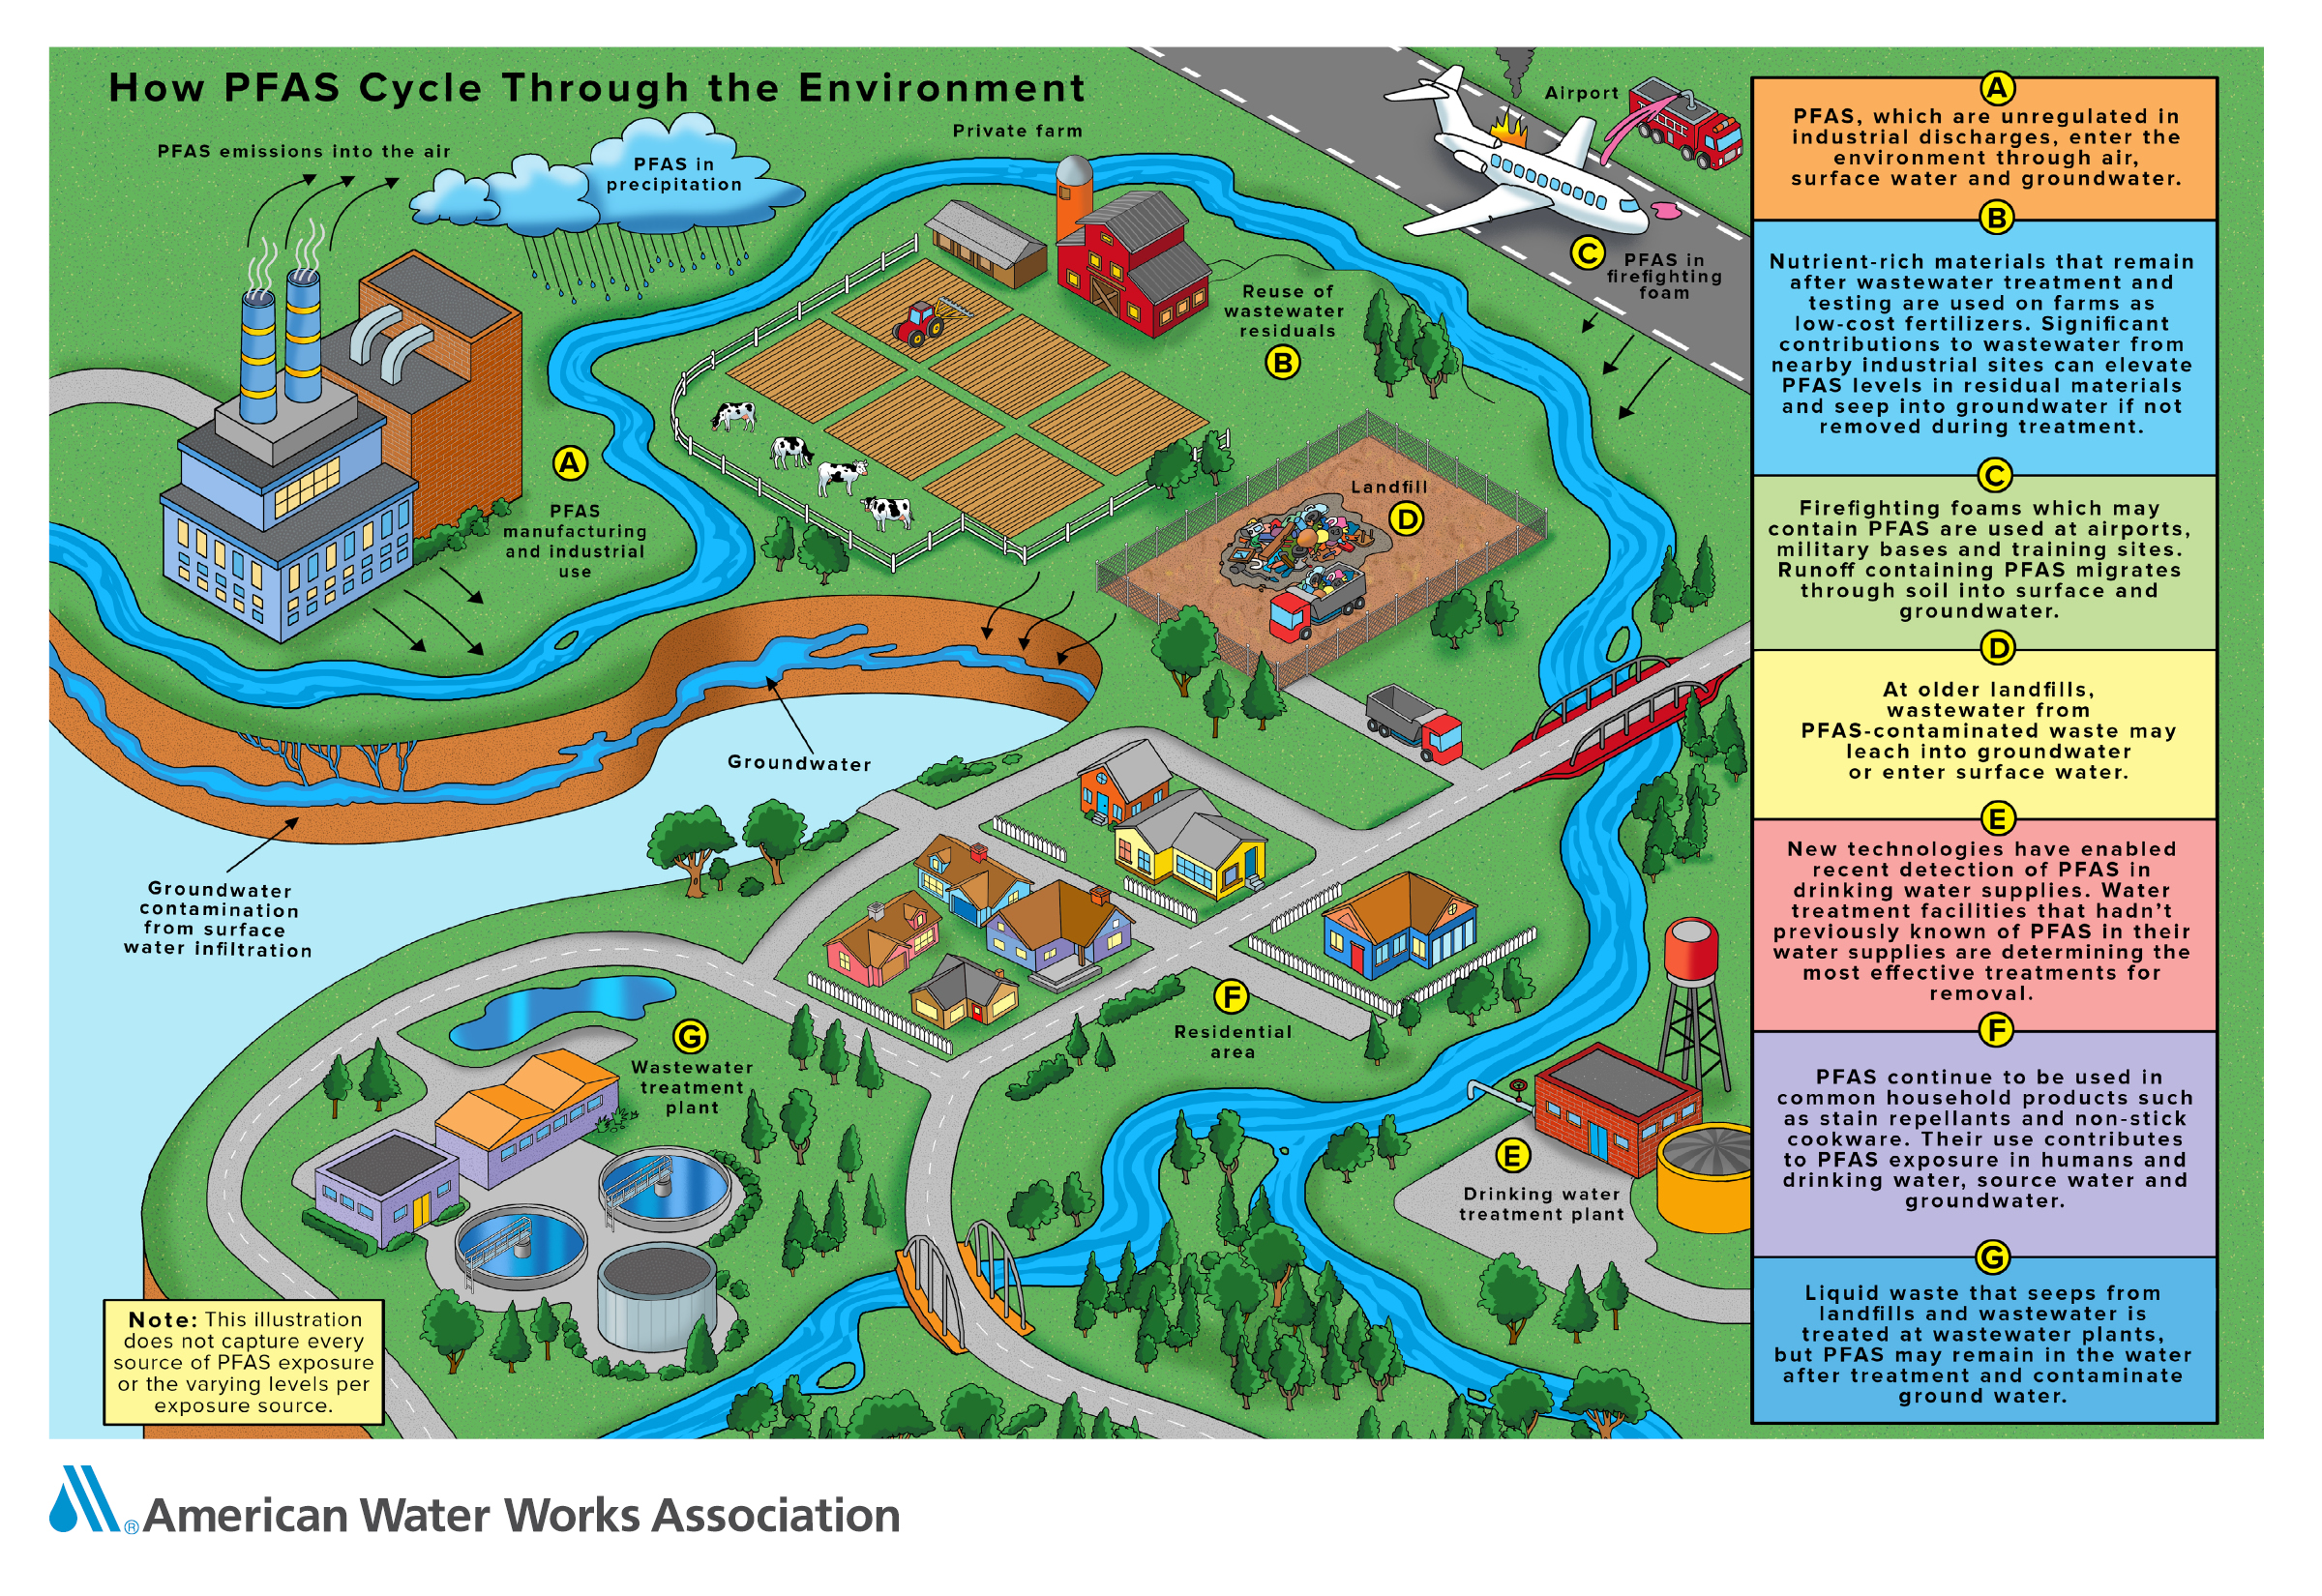 infographic about how PFAS cycles through the environment